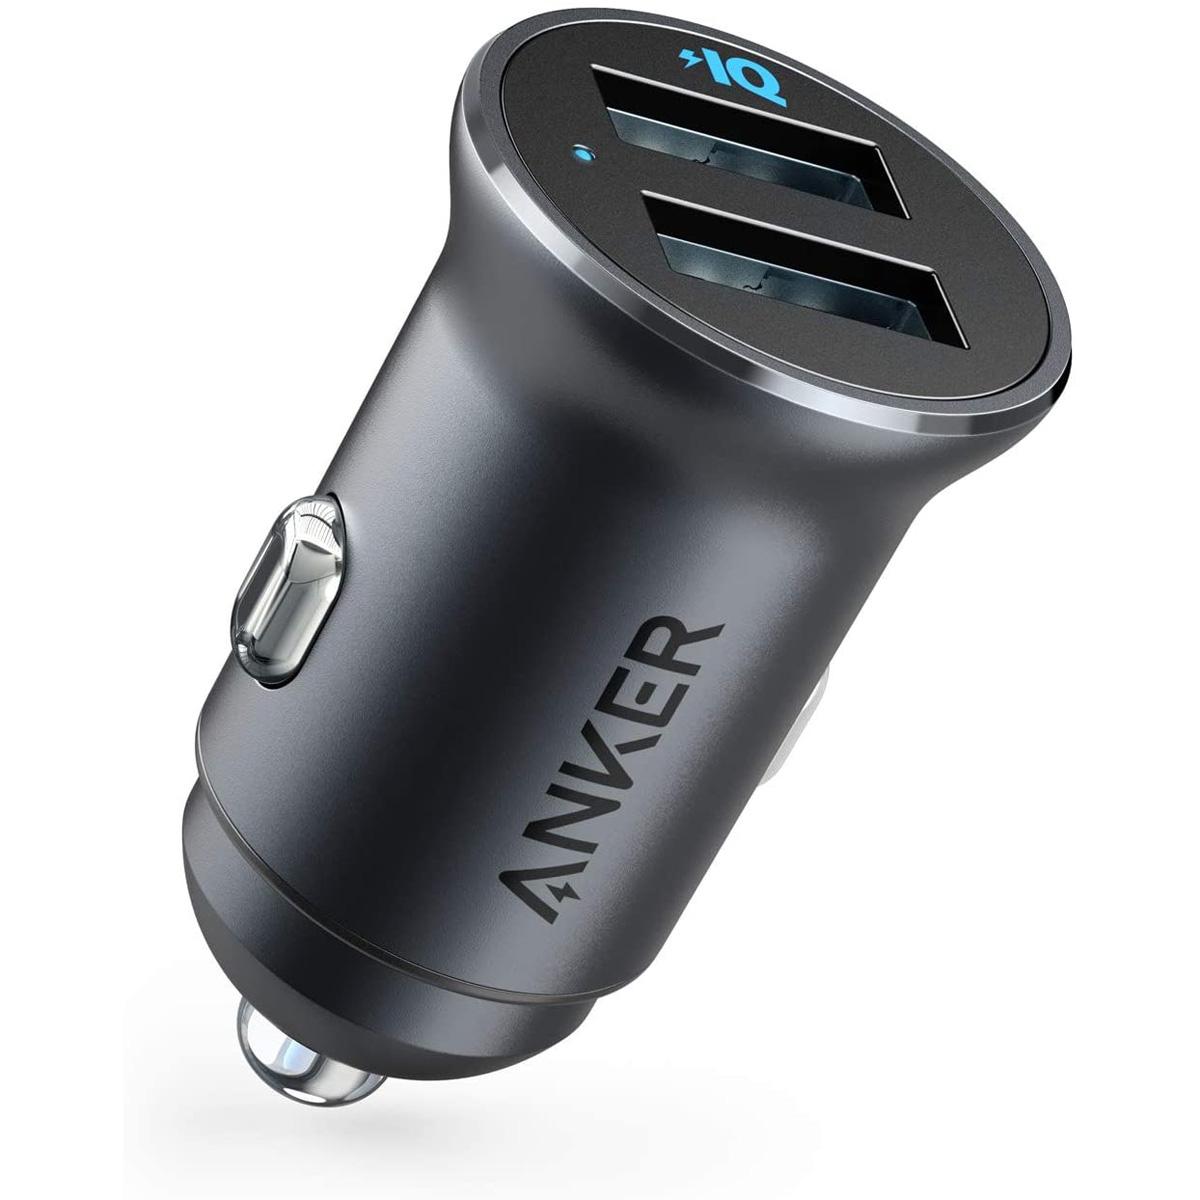 Anker Mini 24W 4.8A Metal Dual USB Car Charger for $8.51